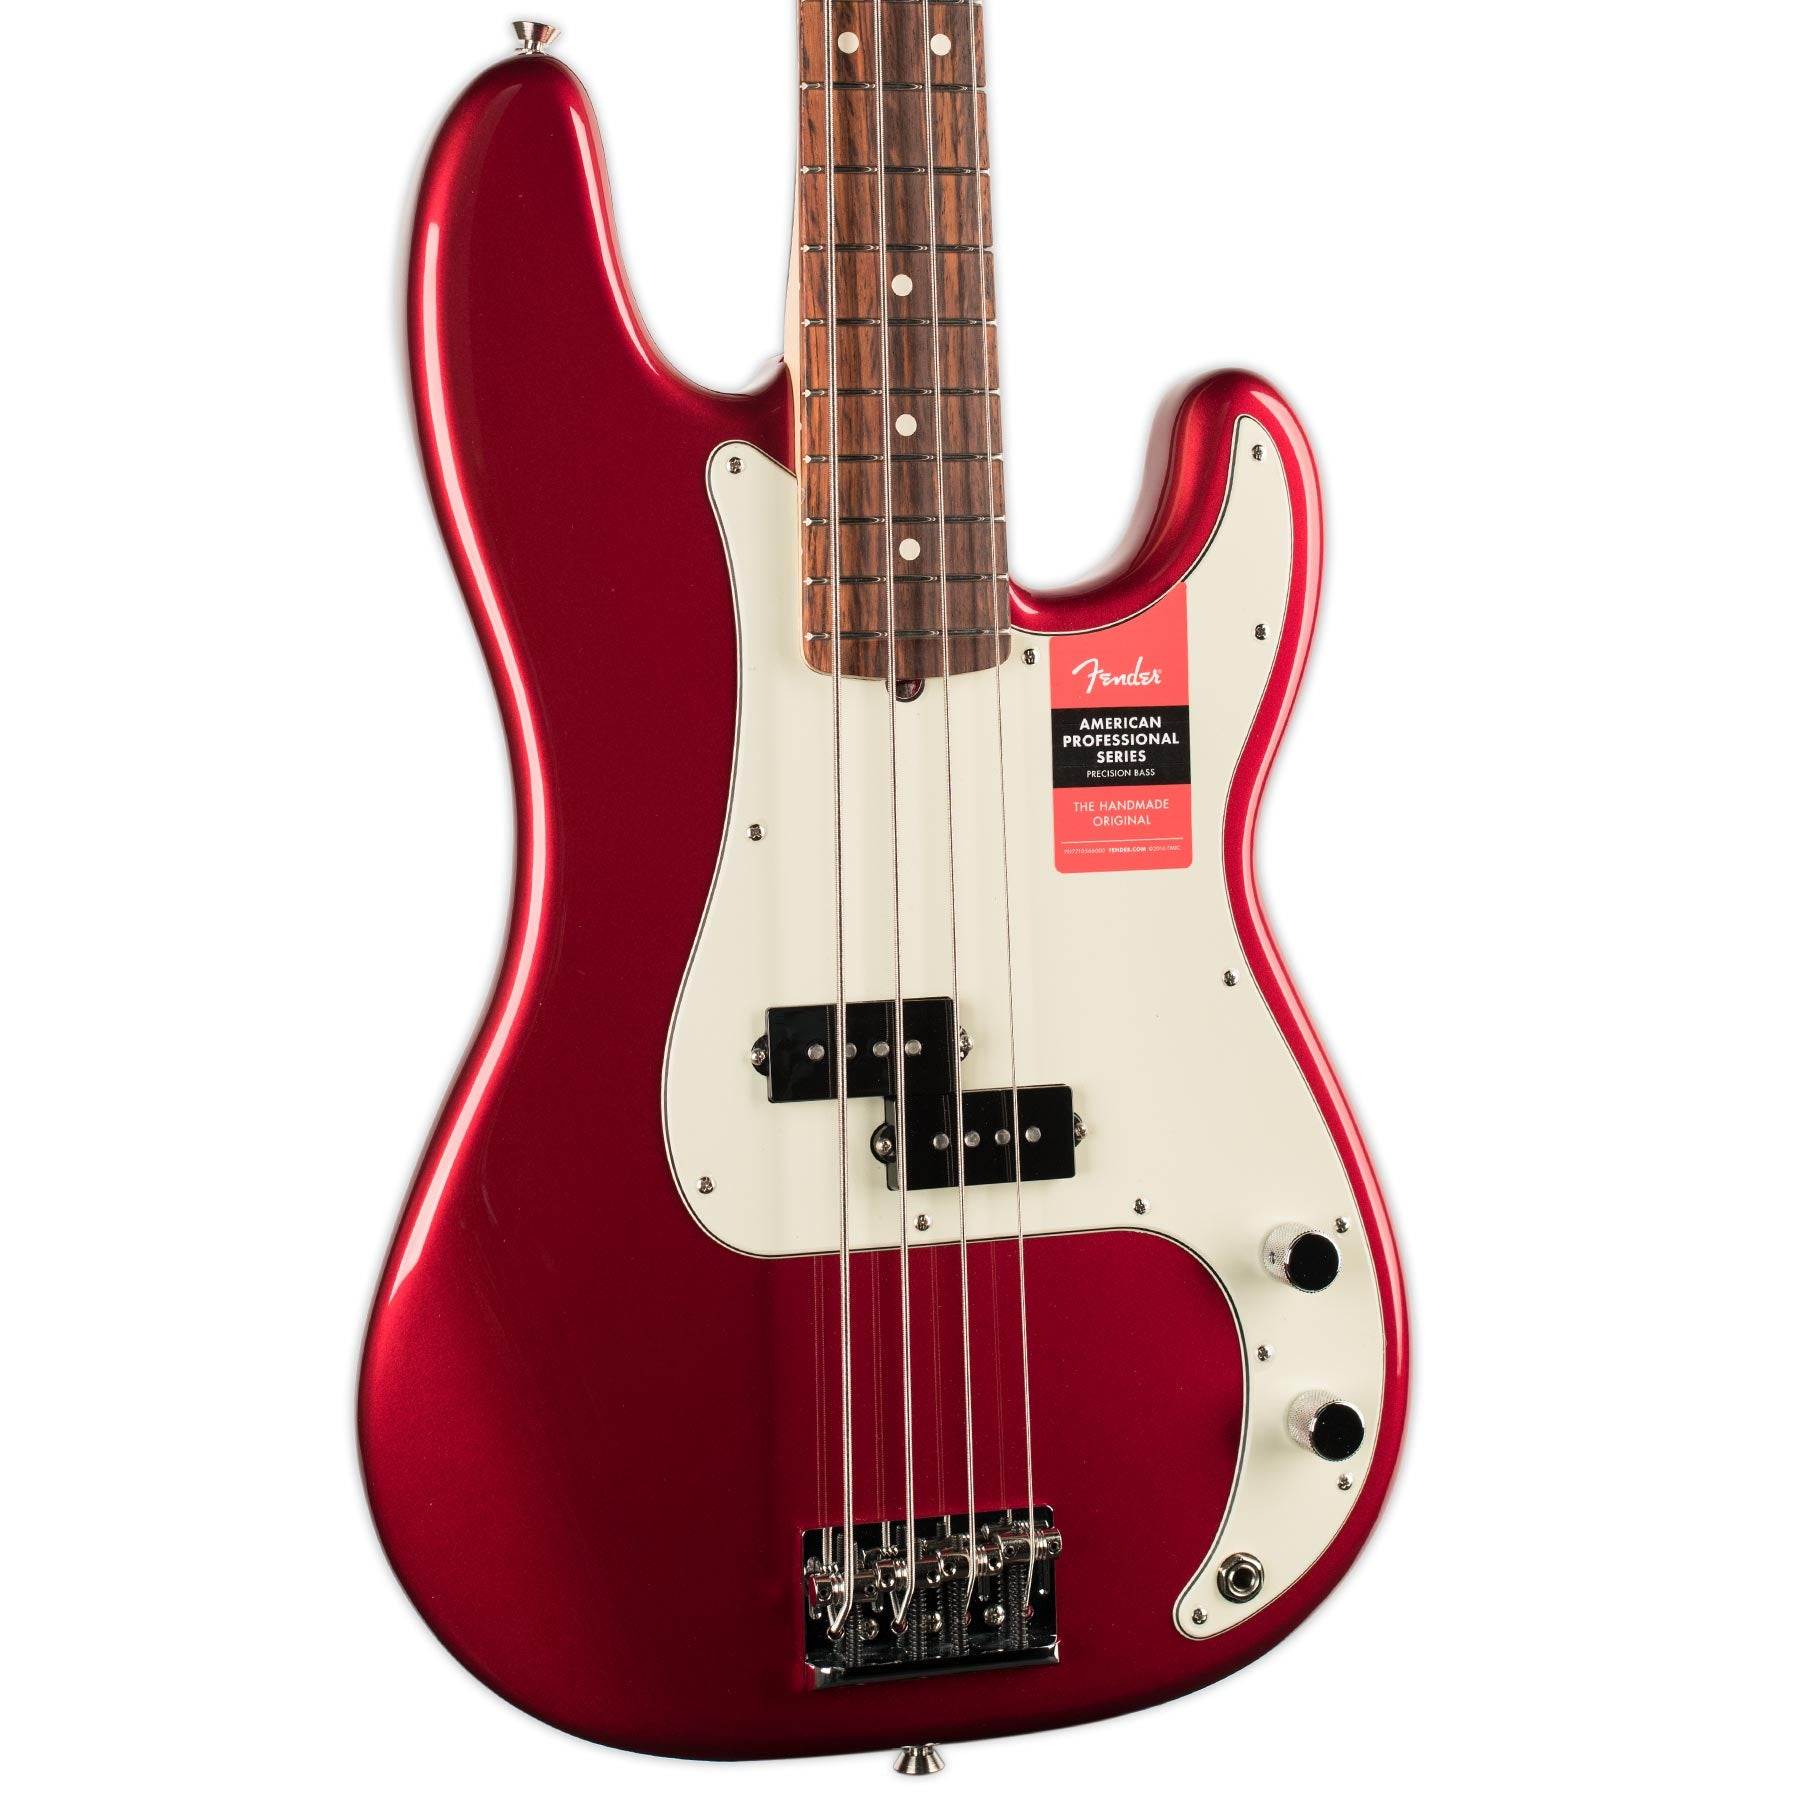 FENDER AMERICAN PROFESSIONAL SERIES P BASS, CANDY APPLE RED, RW